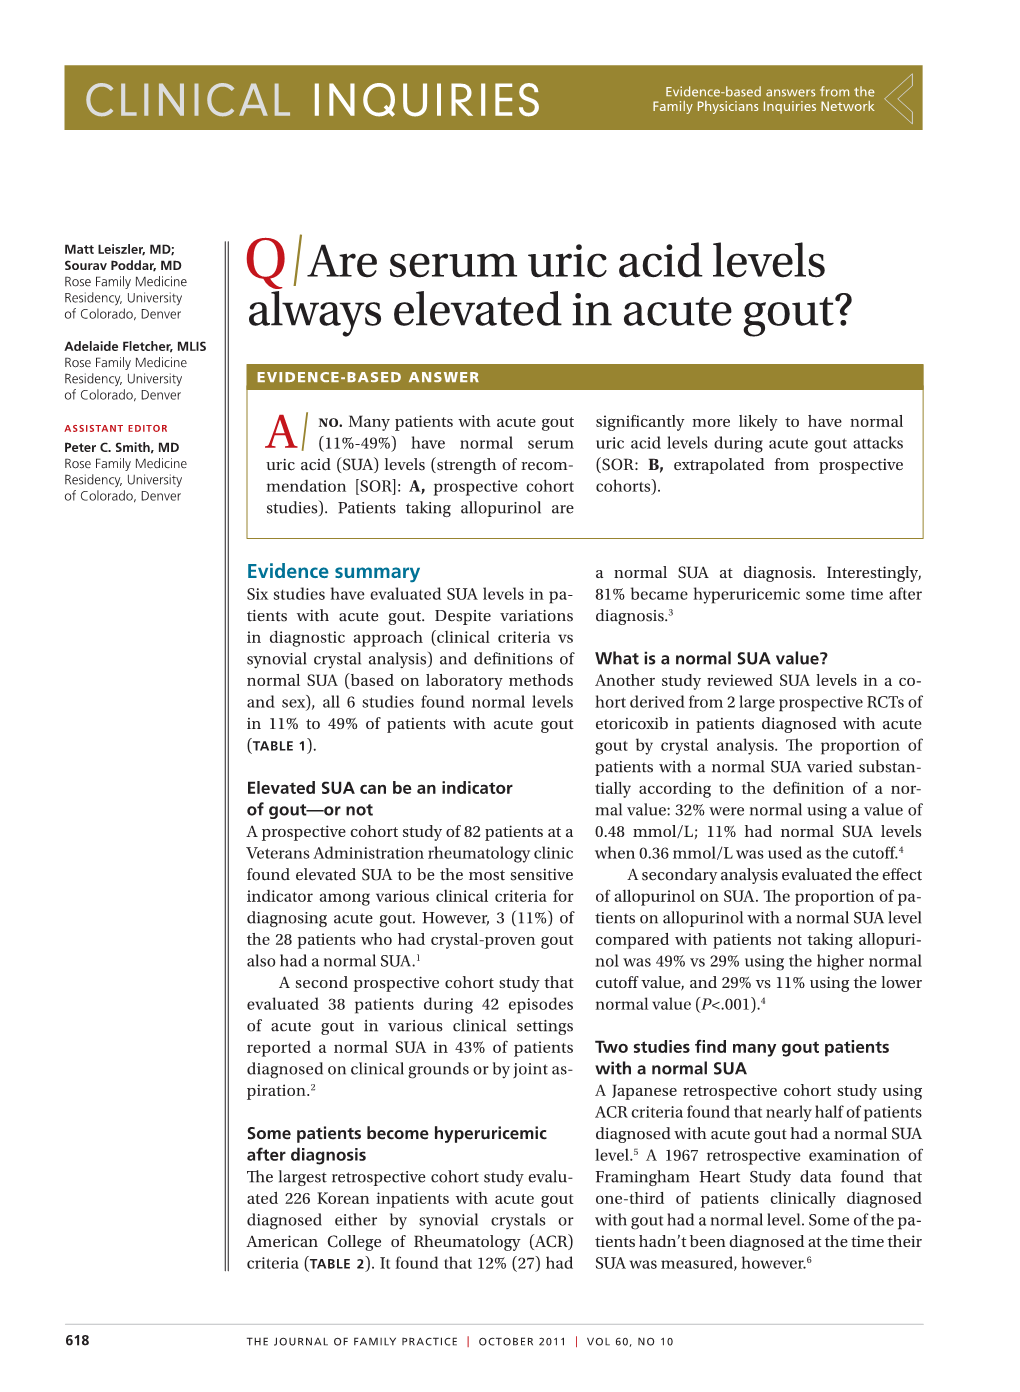 Are Serum Uric Acid Levels Always Elevated in Acute Gout?